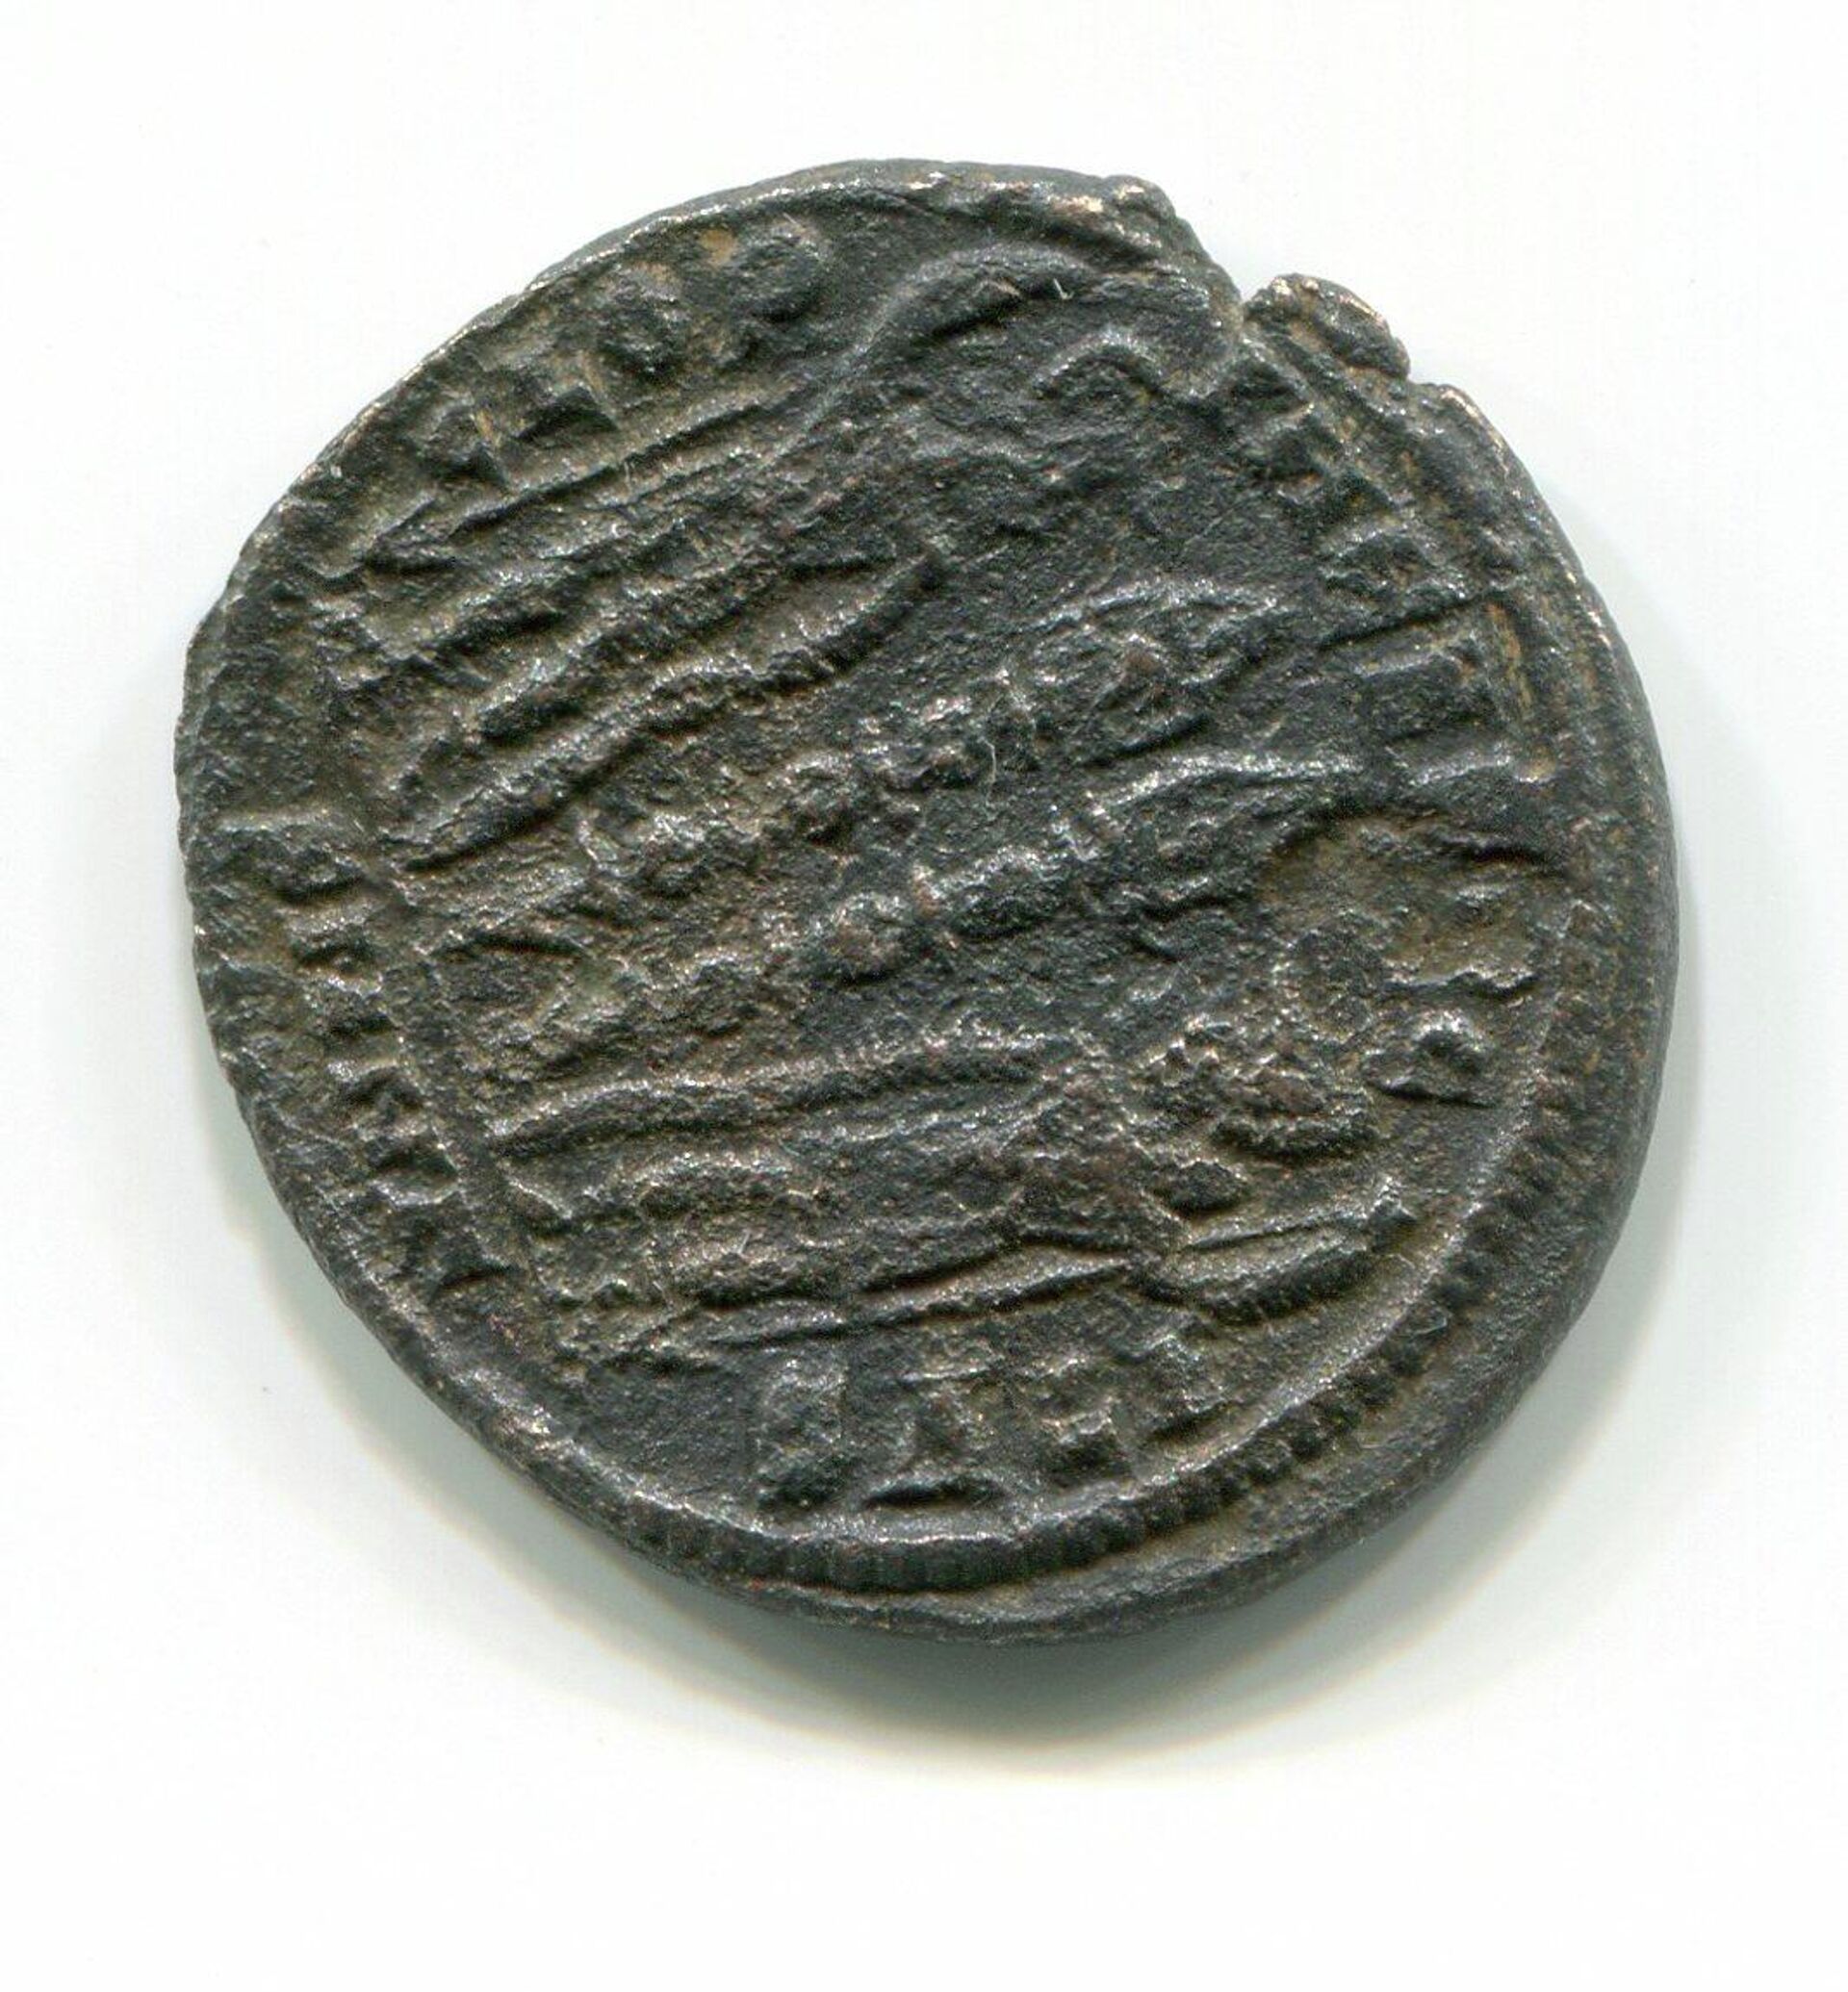 Coin discovered by archaeologist of the Kulikovo Battlefield Museum in a forest 10 km from the centre of Tula - Sputnik International, 1920, 19.11.2021